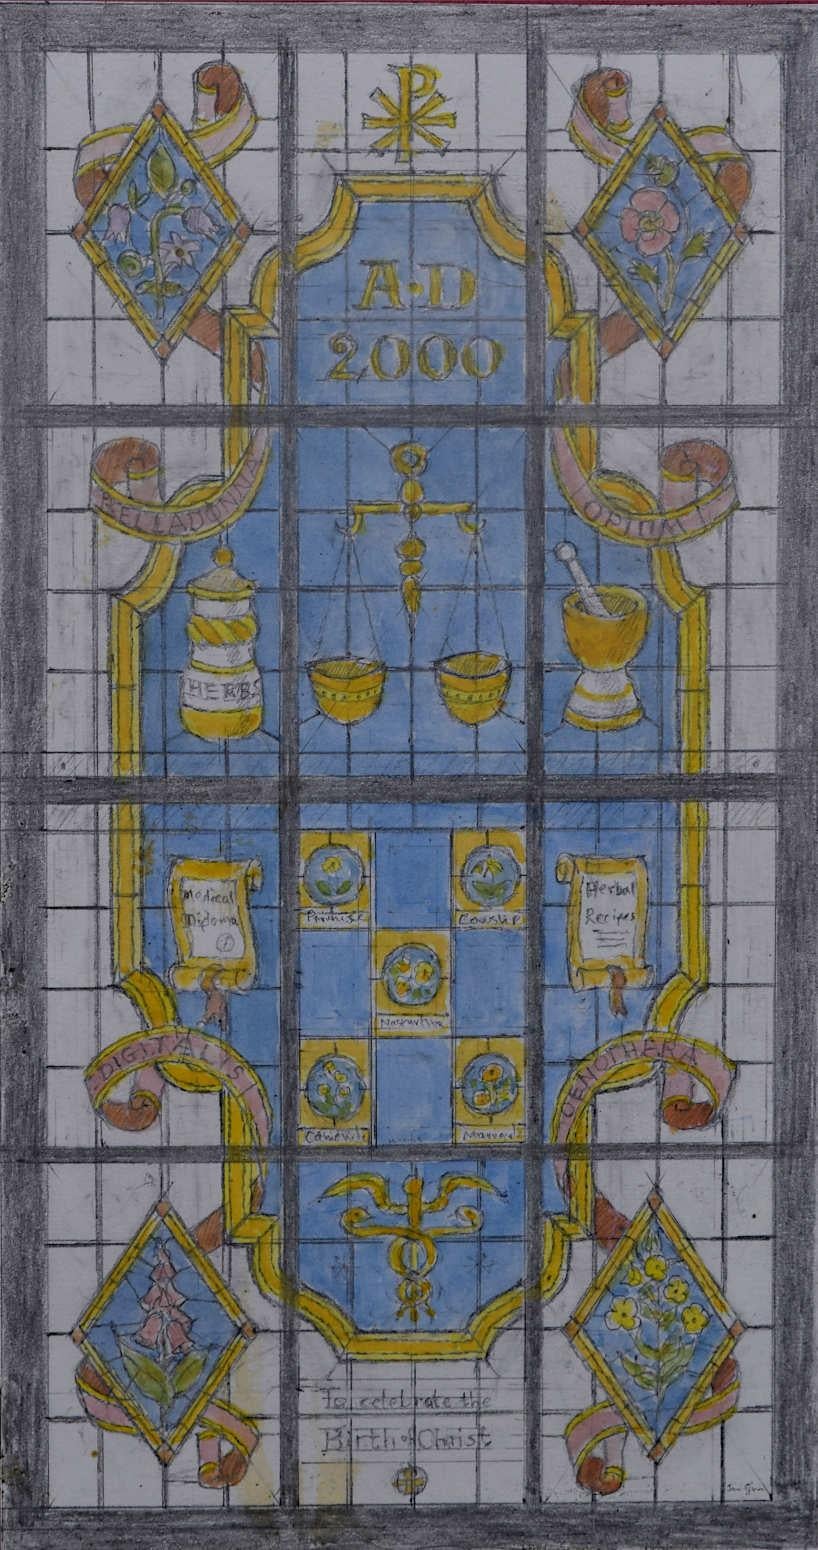 We acquired a series of watercolour stained glass designs from Jane Gray's studio. To find more scroll down to "More from this Seller" and below it click on "See all from this seller." 

Jane Gray (b.1931)
Stained Glass Design
Watercolour
25 x 13.5